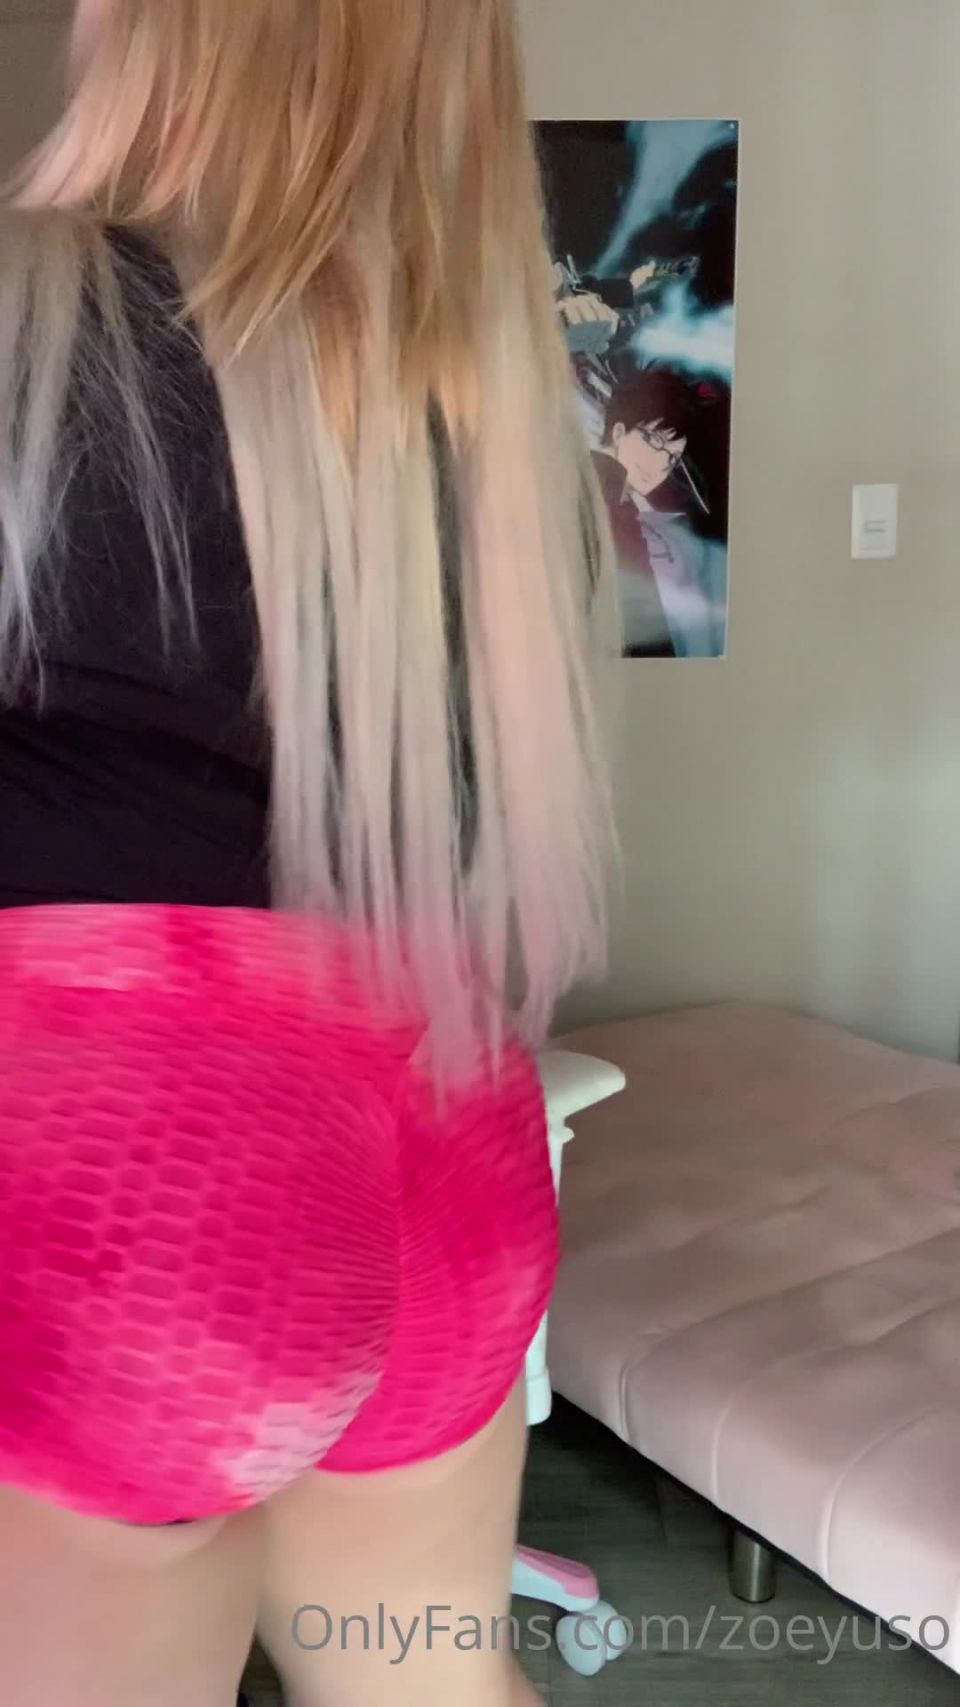 Zoey Uso ZoeyusoSo horny for you - 14-09-2020 - Onlyfans